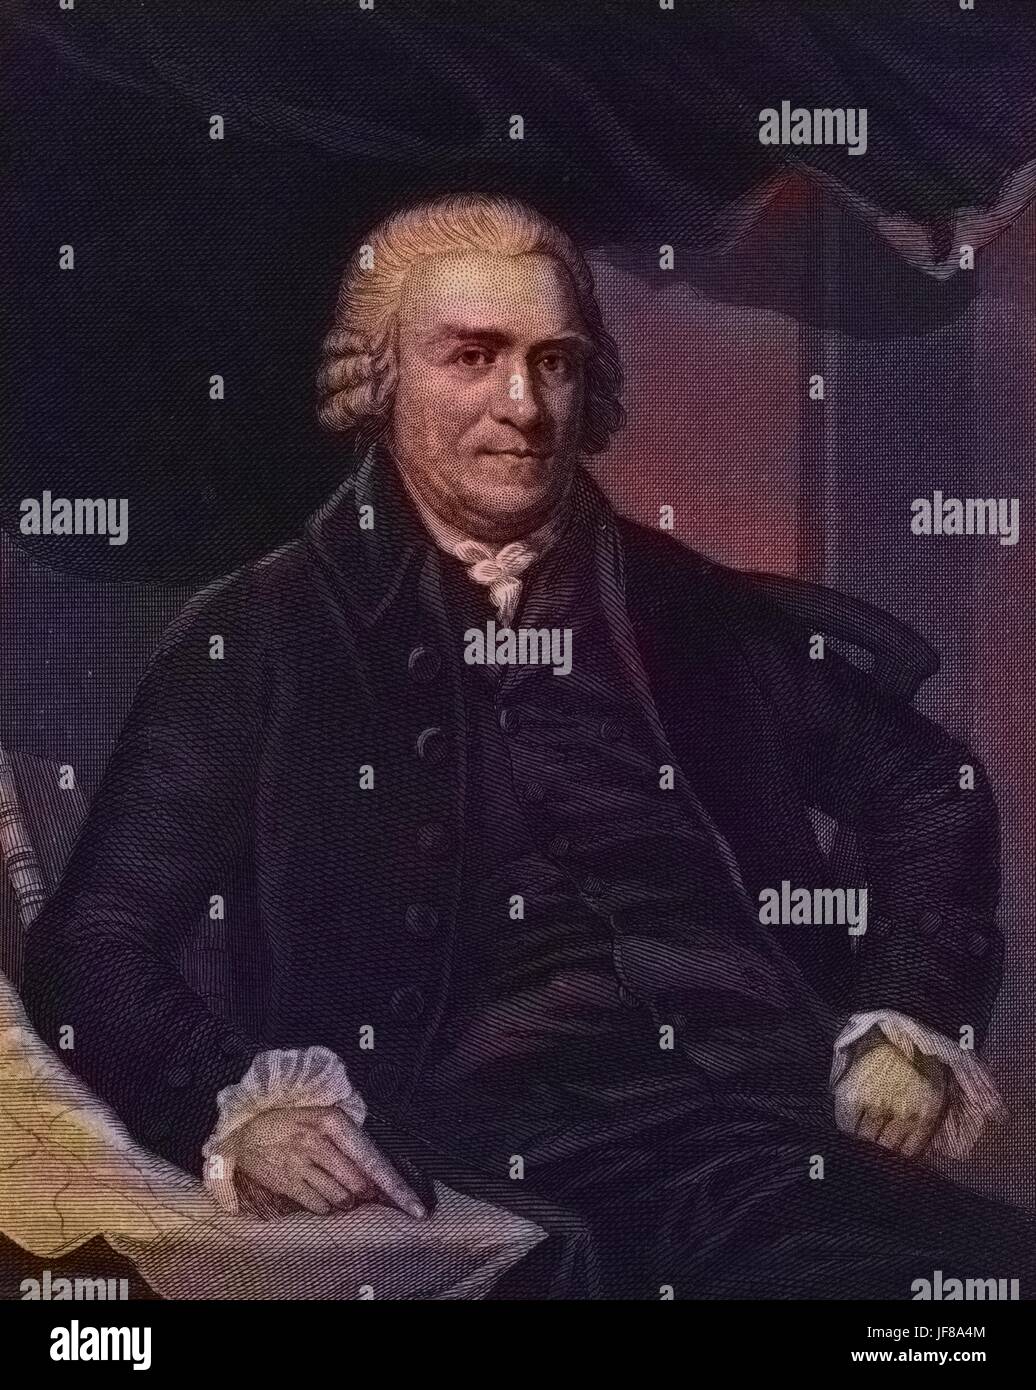 Portrait of Samuel Adams, political philosopher and founding father of the United States, by Henry Bryan Hall, 1770. From the New York Public Library. Note: Image has been digitally colorized using a modern process. Colors may not be period-accurate. Stock Photo